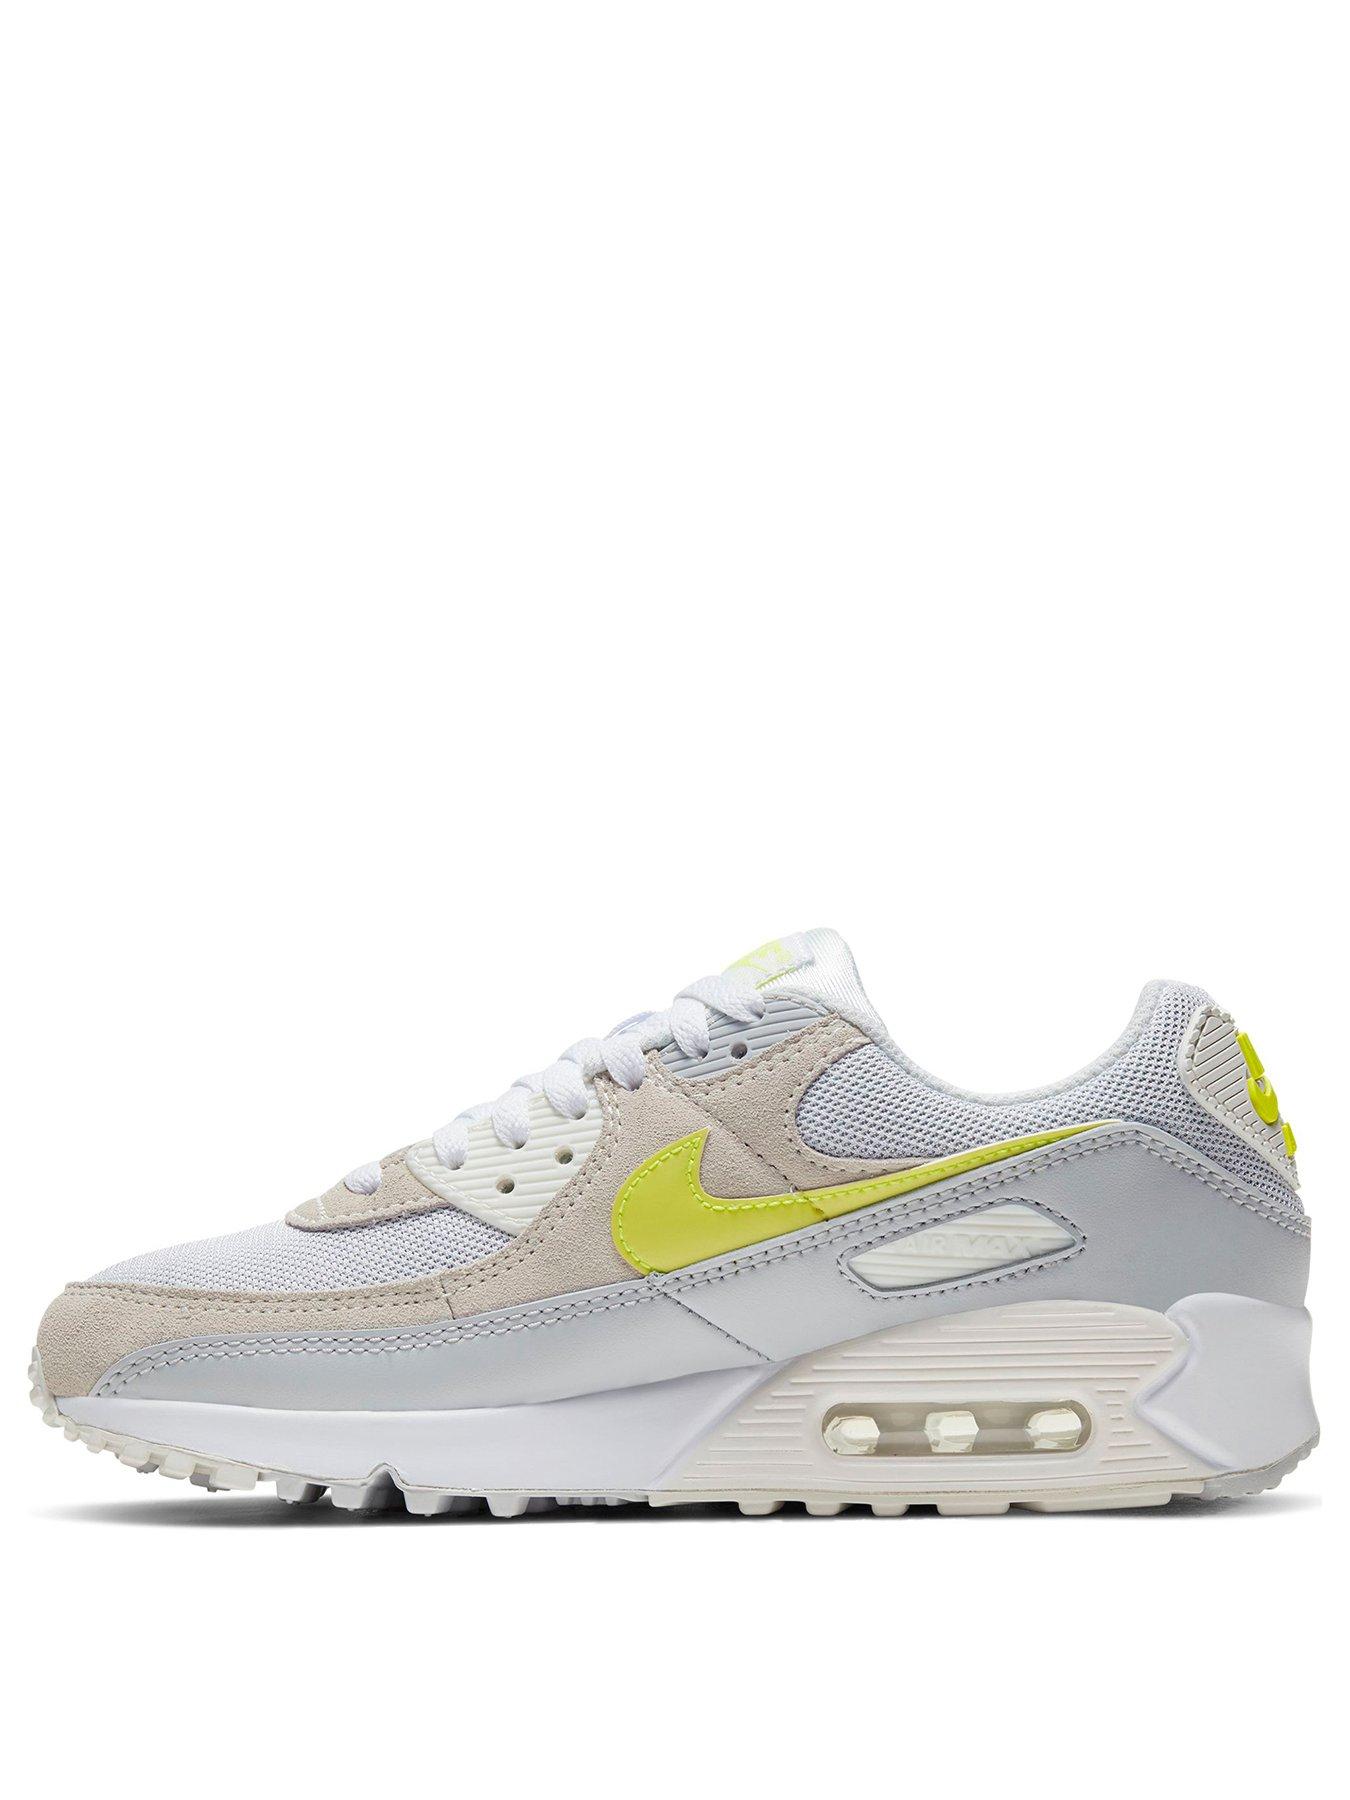 white and yellow air max 90